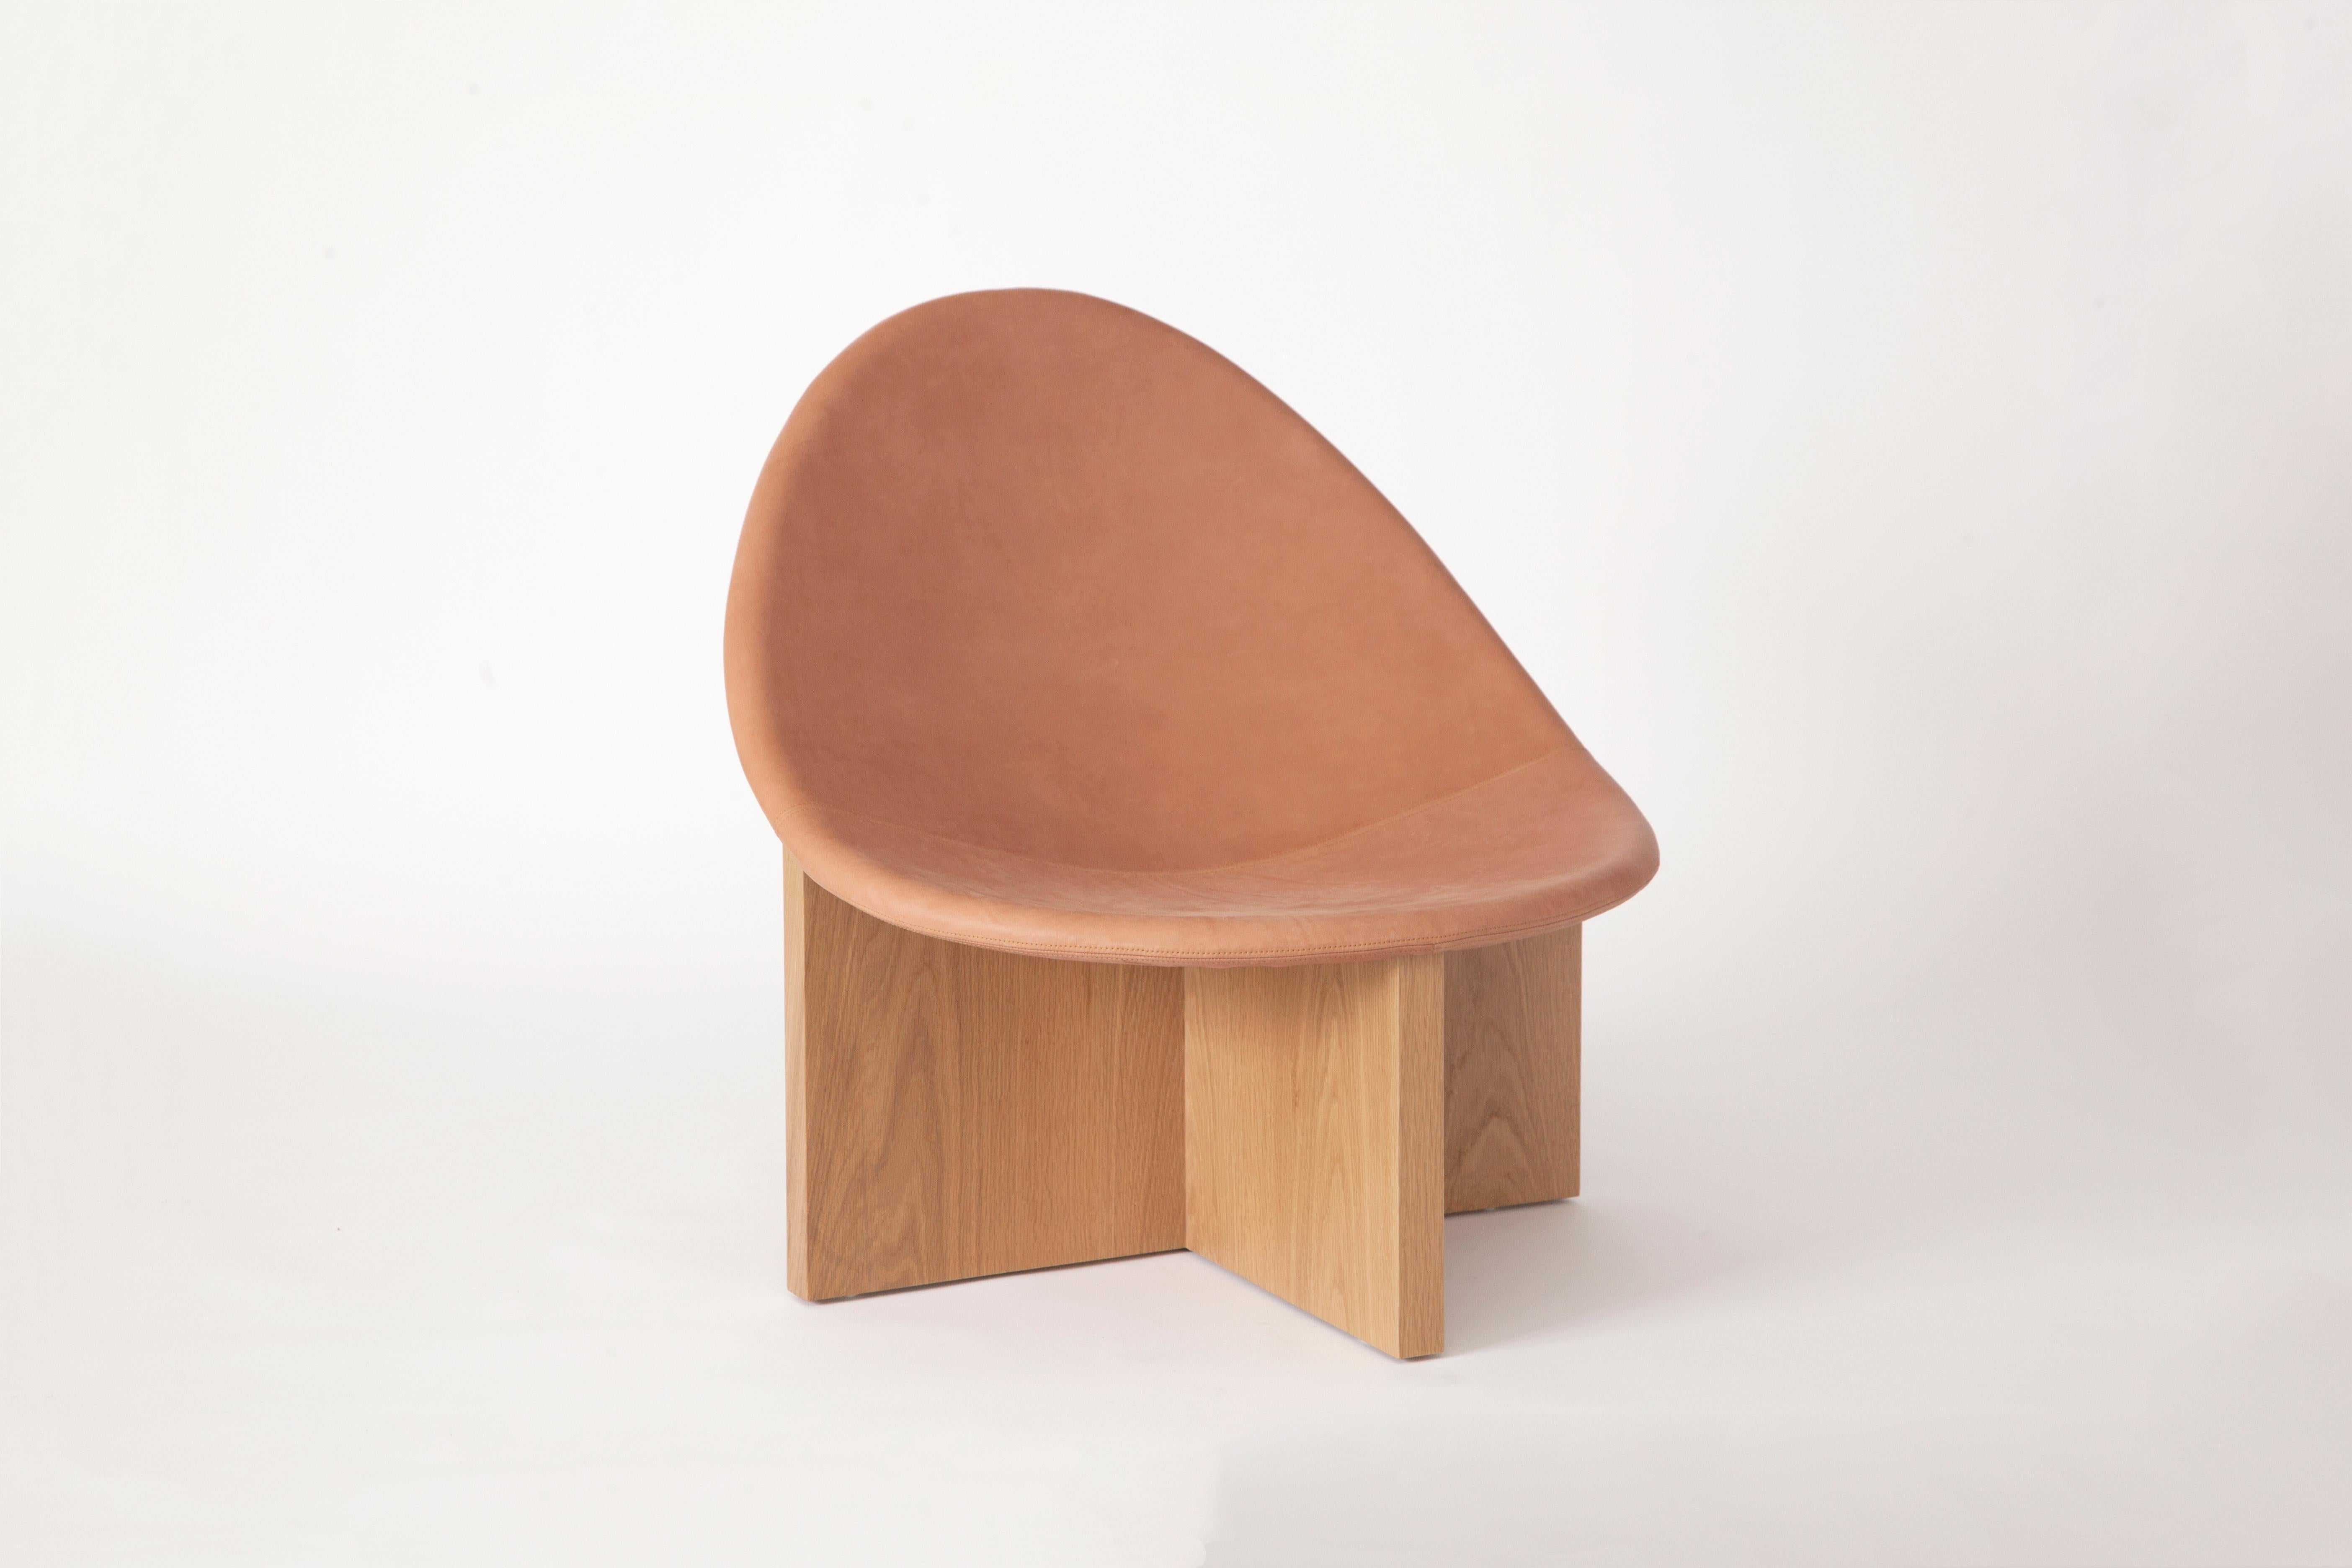 The NIDO chair was the result of playing with the juxtaposition of shapes. The egg-like shape of the leather upholstered wood seat nesting in the cross shaped solid wood frame, gives it the name NIDO, meaning nest in Spanish. The NIDO's strong lines